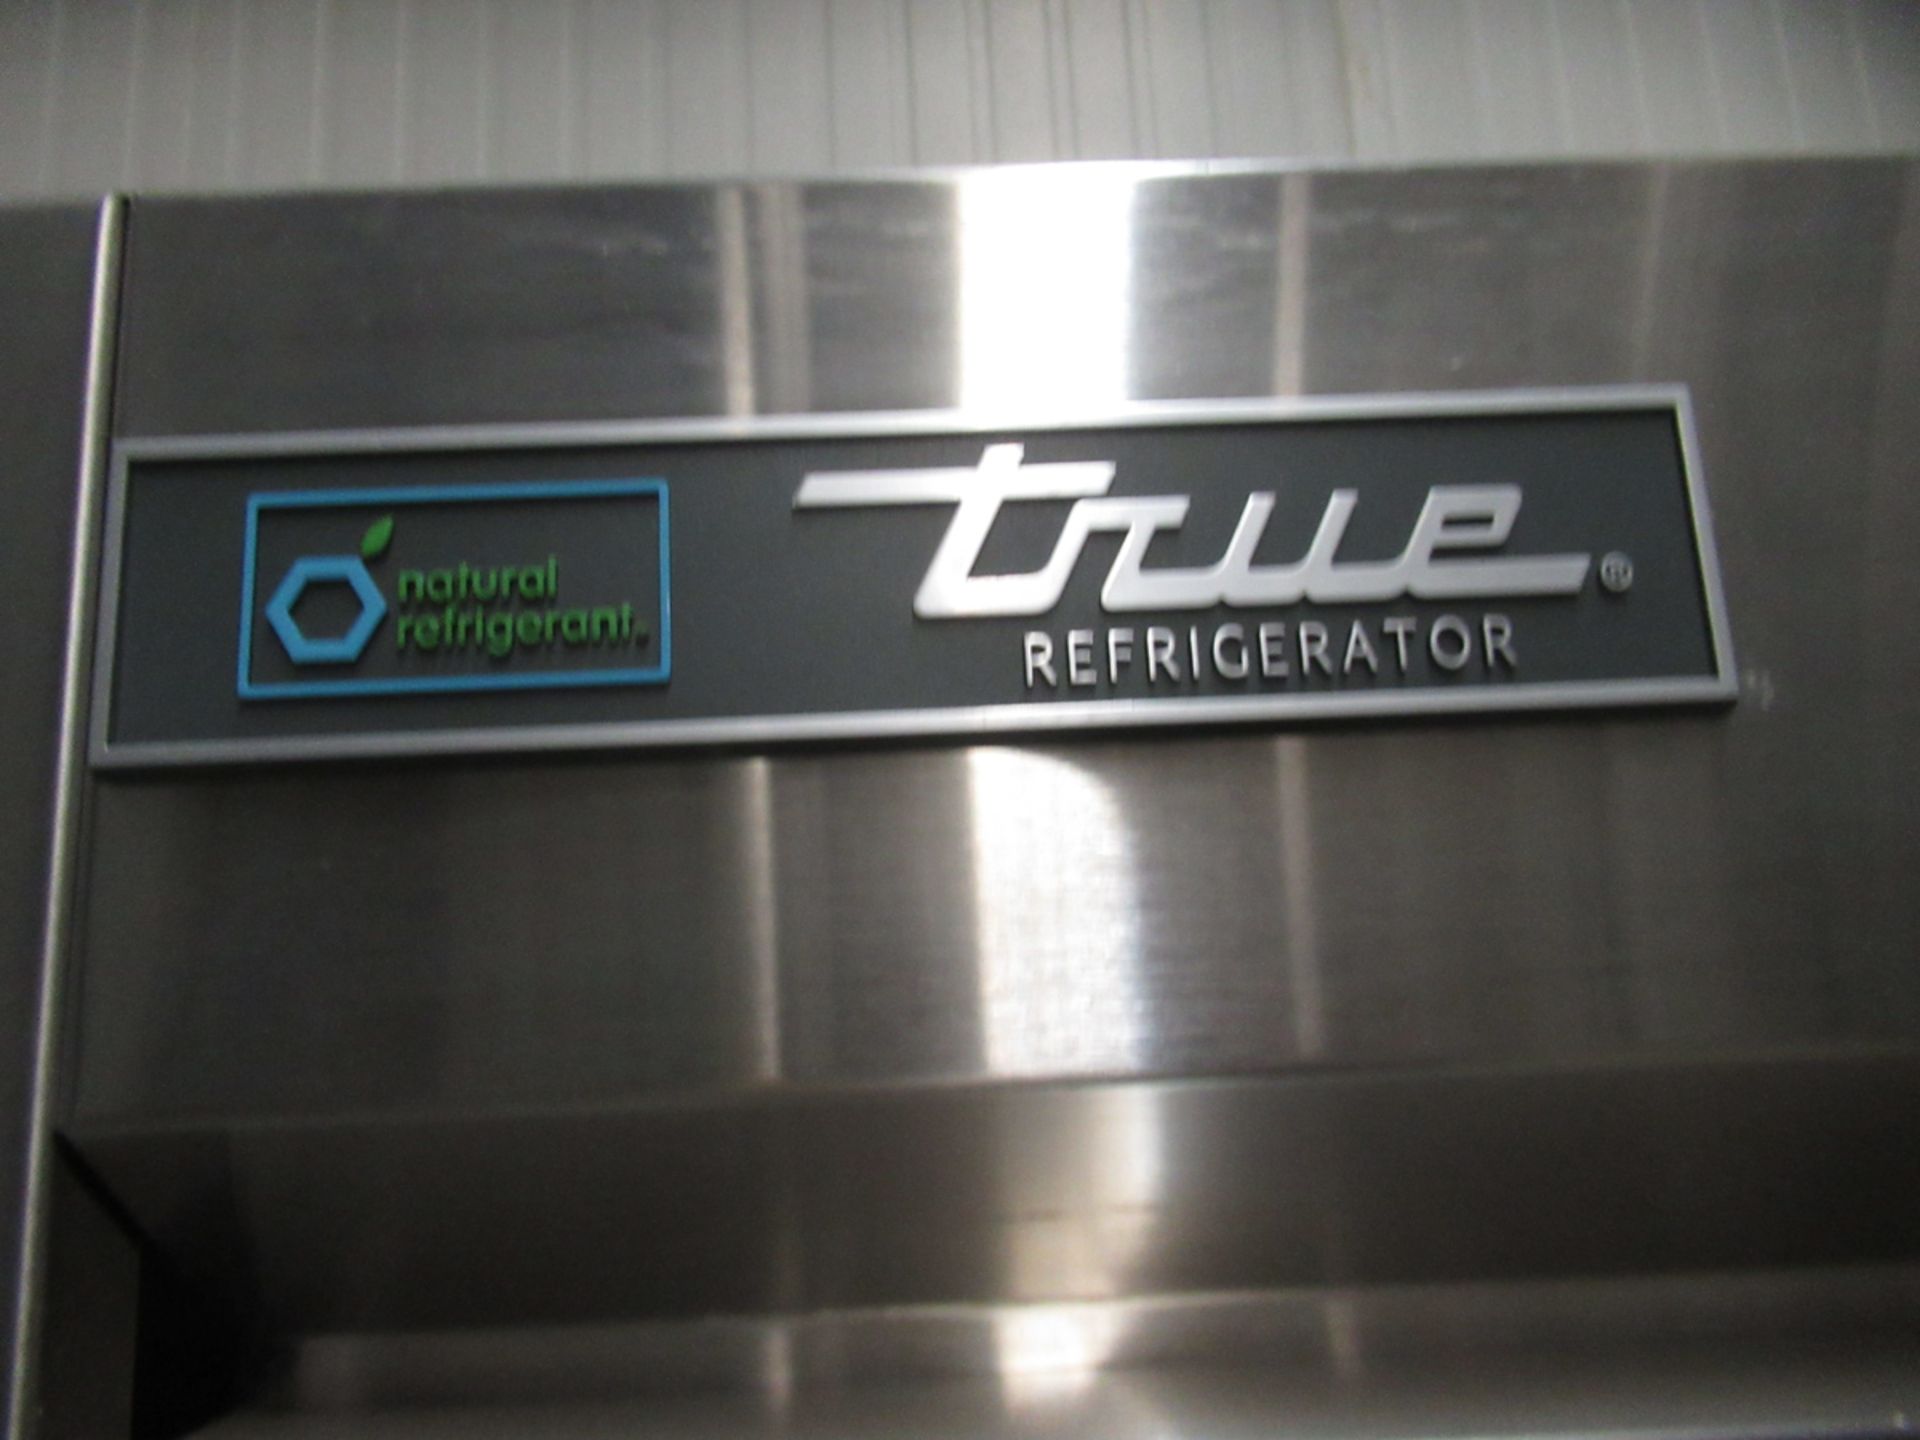 TRUE T-72-HC 78 1/10" THREE SECTION REACH IN REFRIGERATOR, S/N: 10127581 - Image 3 of 3